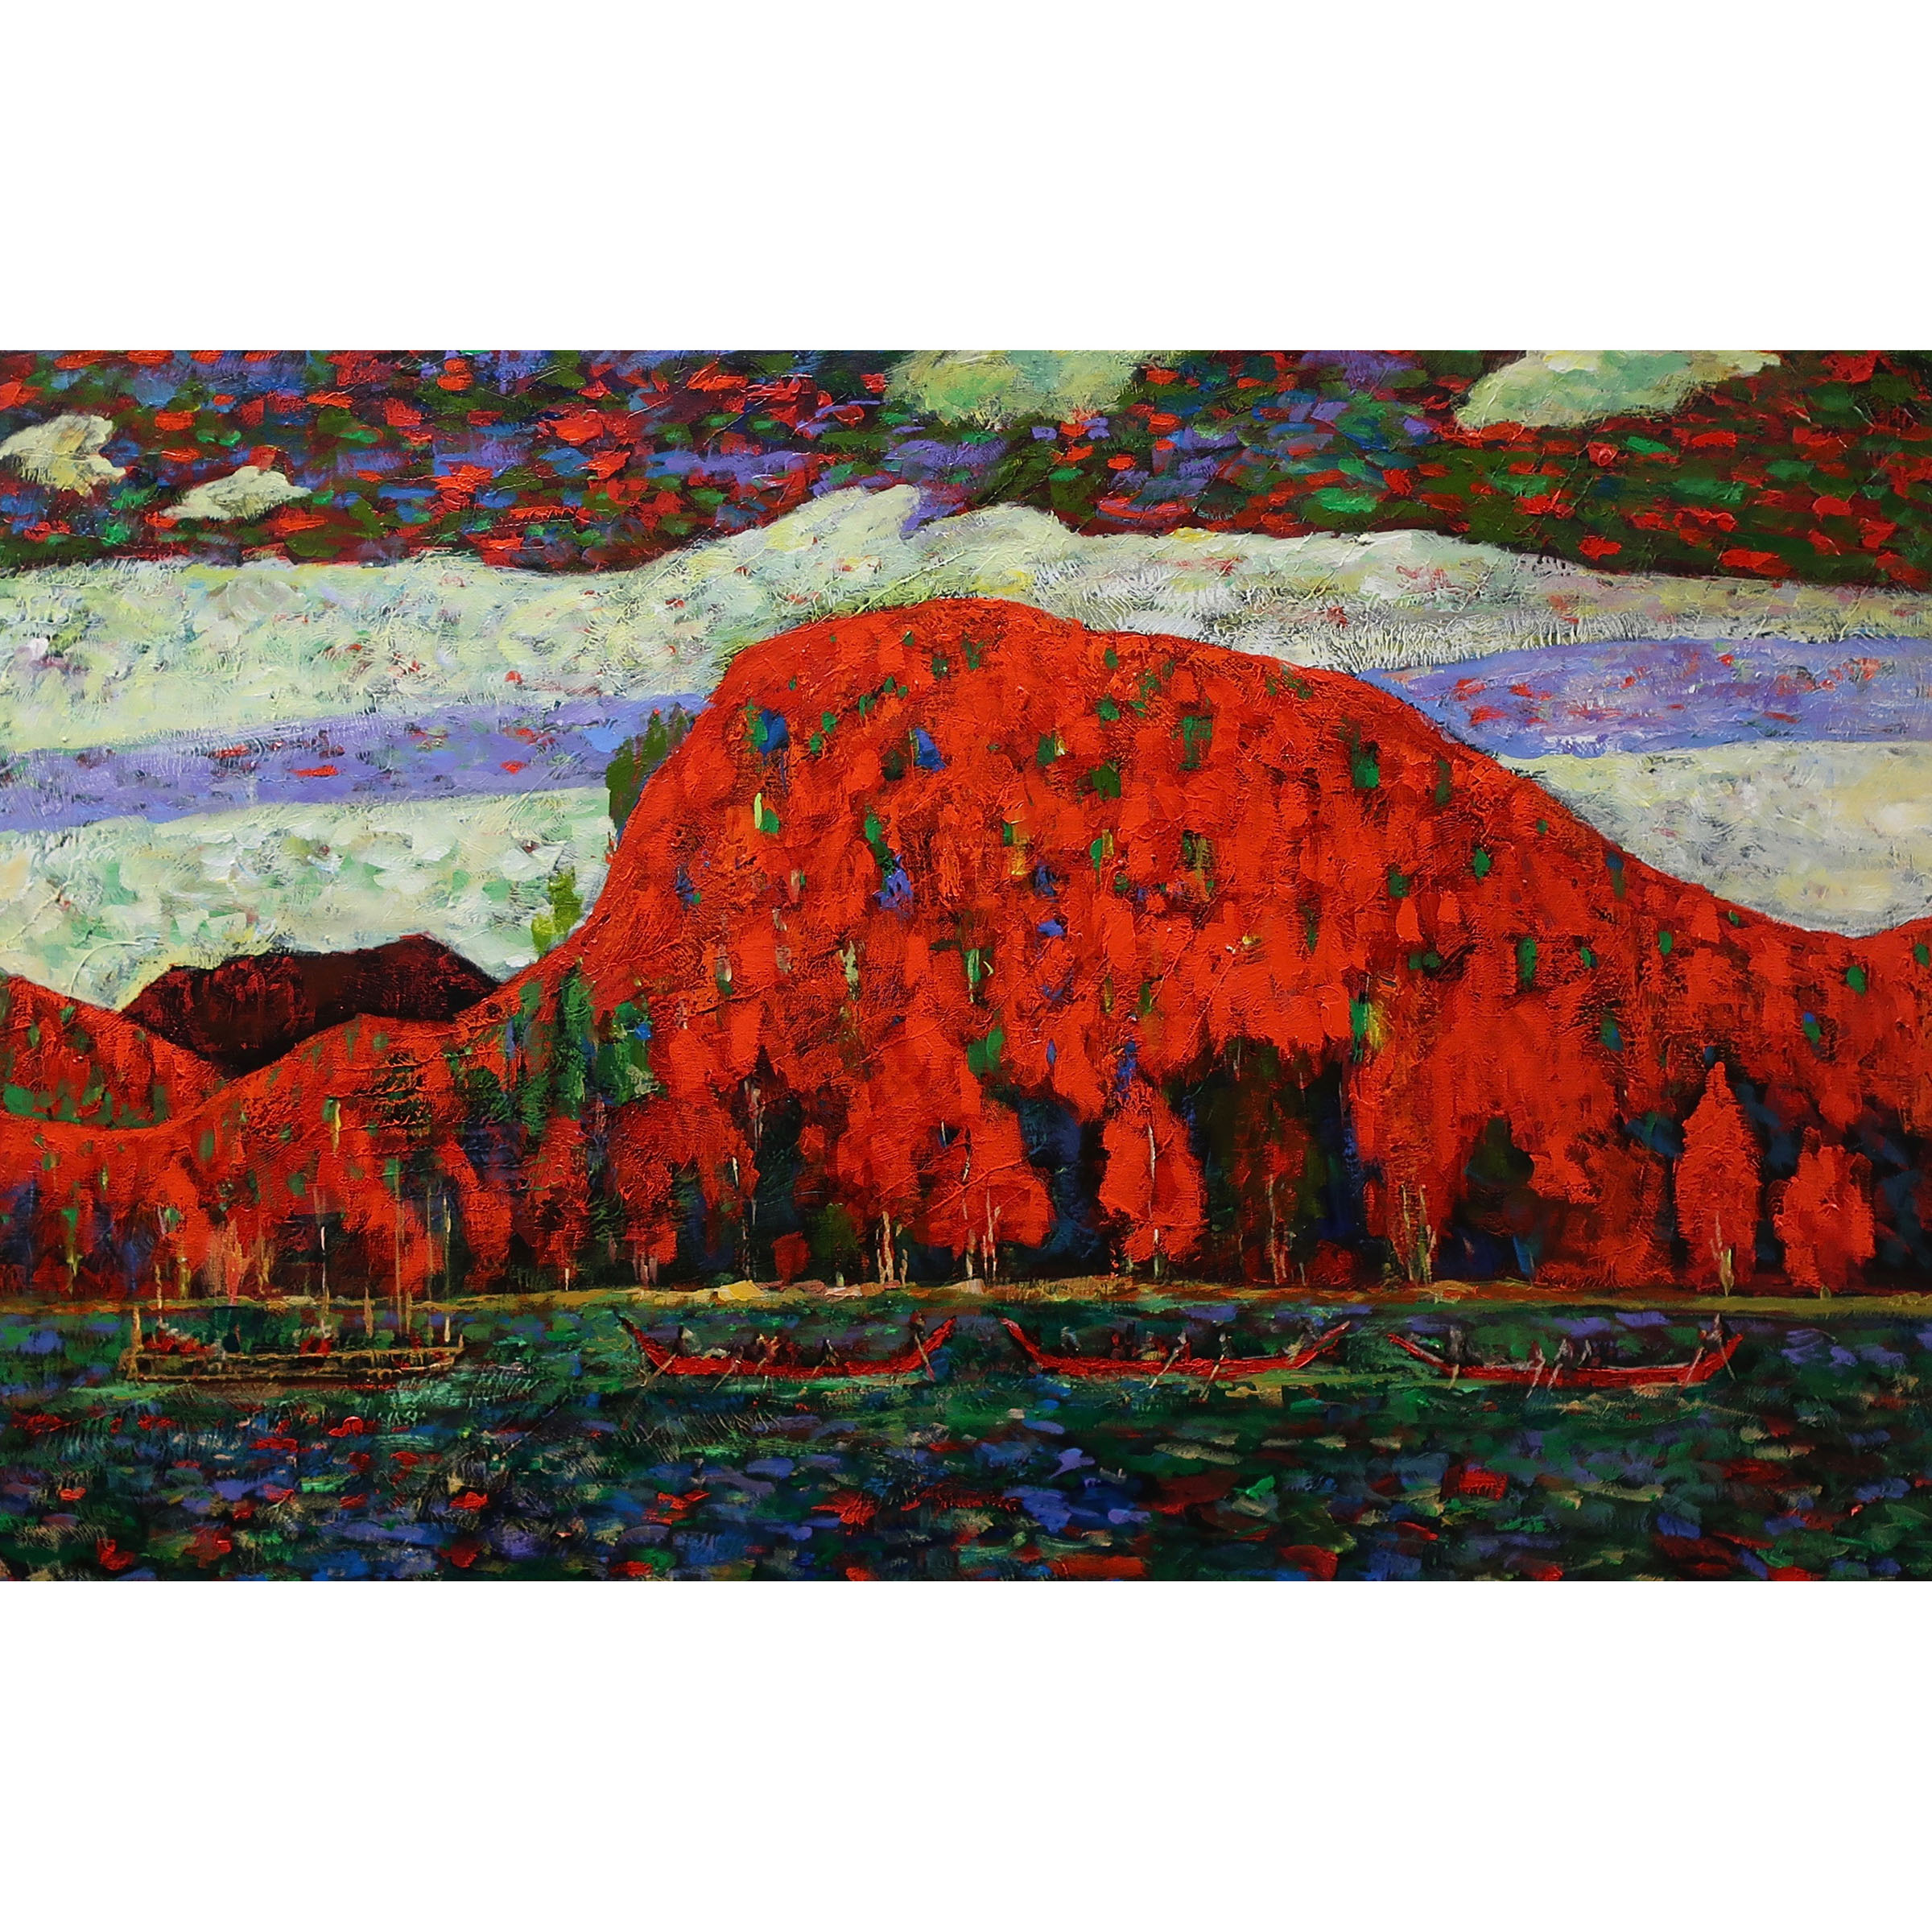 UNSIGNED (CANADIAN, 20TH CENTURY)    